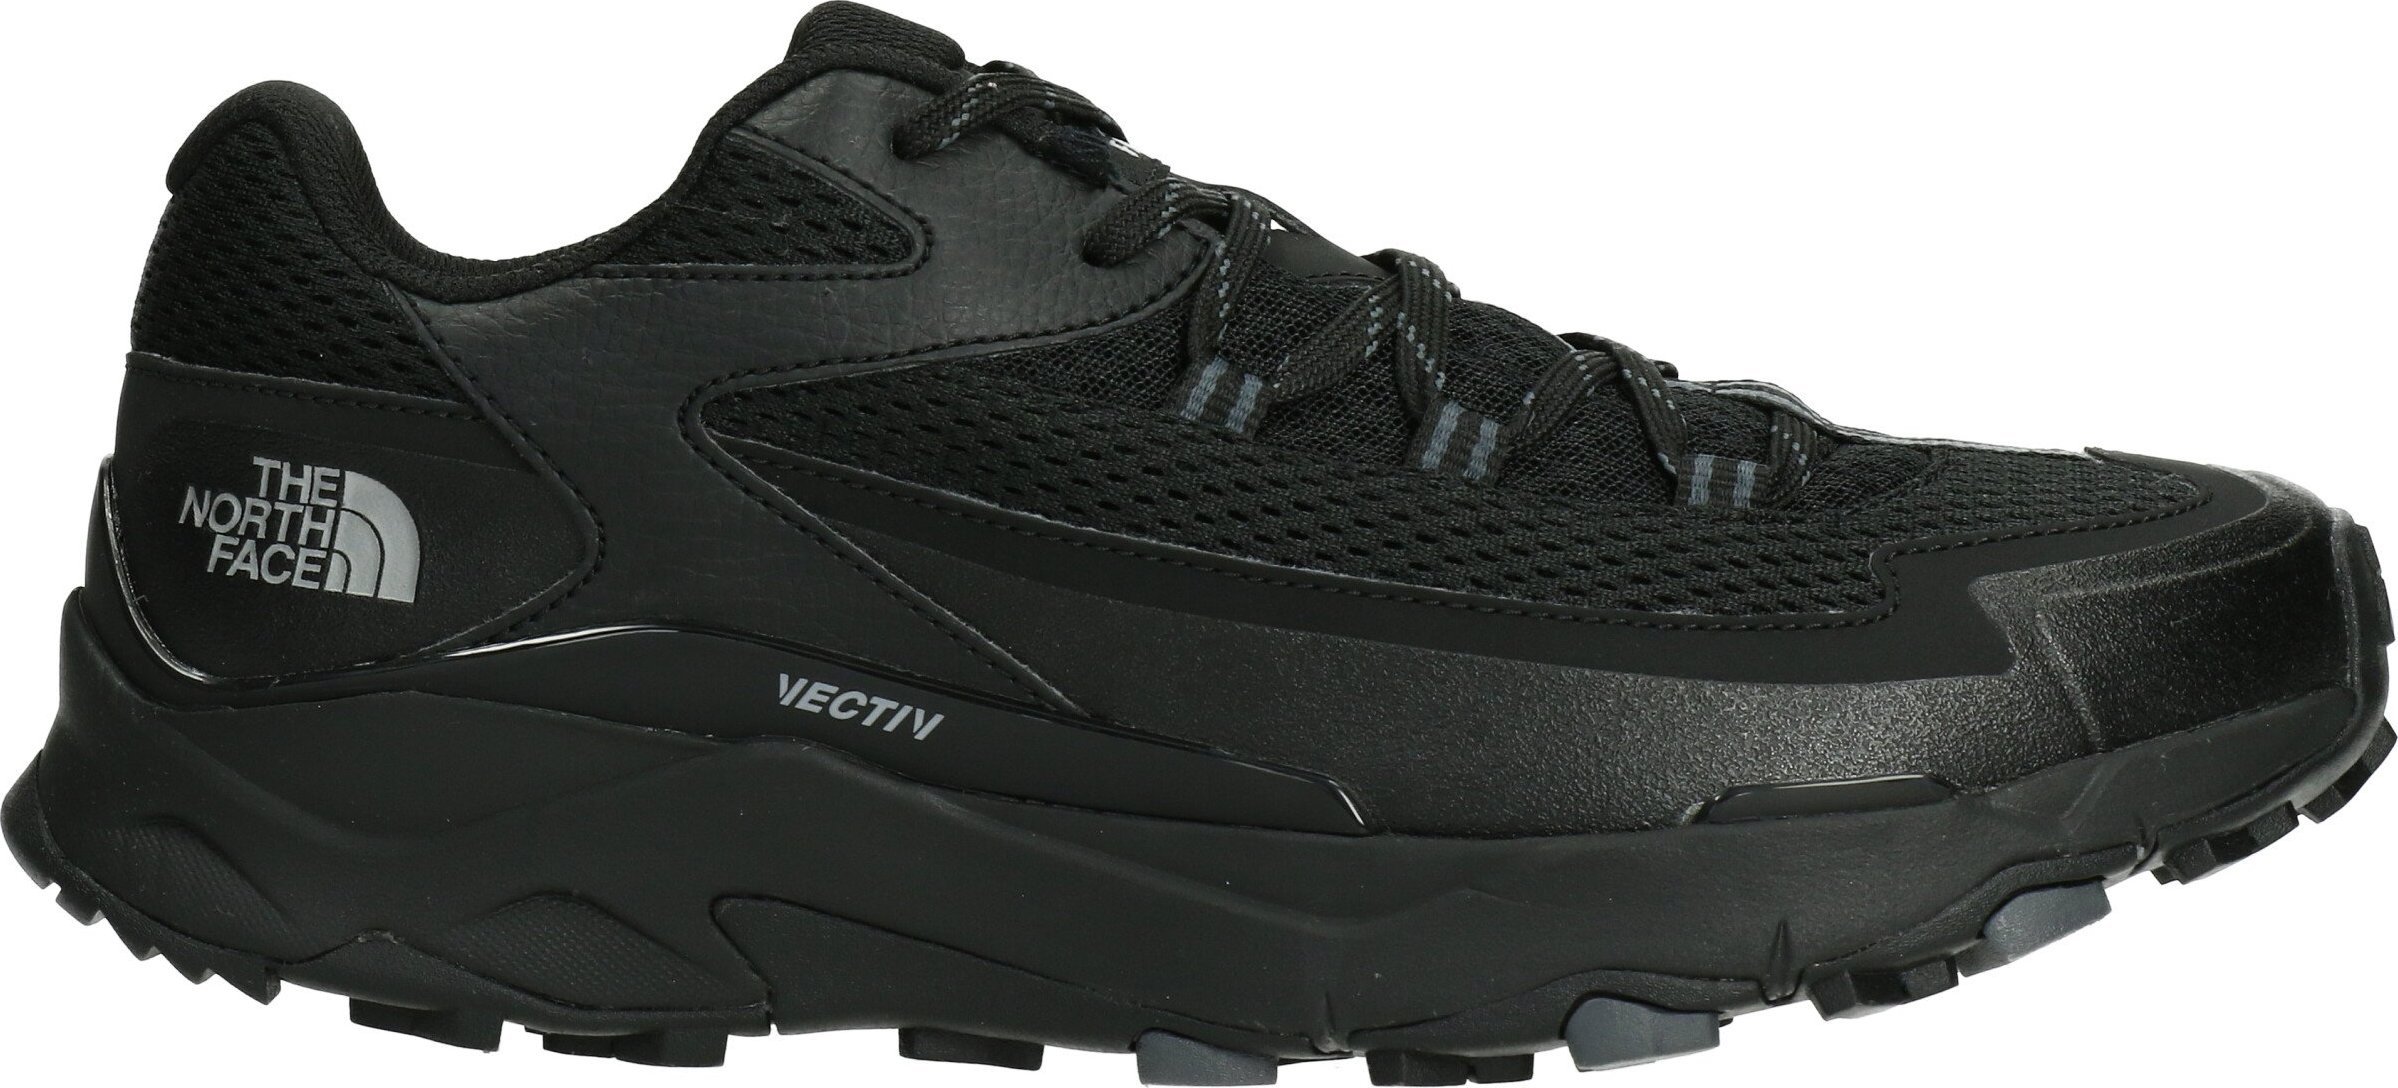 The North Face Buty Trailowe The North Face VECTIV TARAVAL Meskie 42 NF0A52Q1KX7 (196009256798)